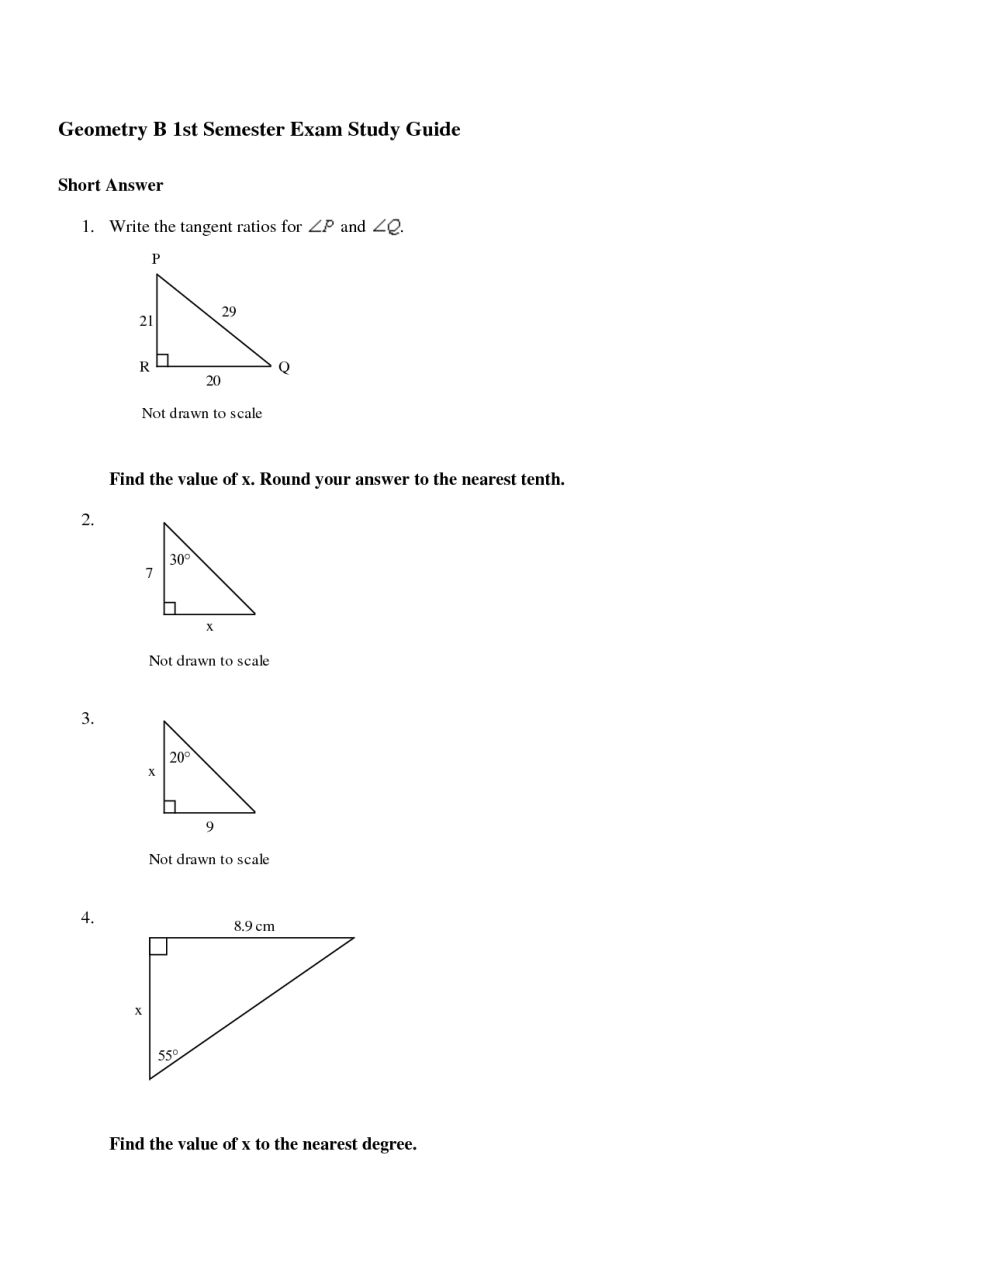 15 Best Images of 10th Grade Math Practice Worksheets 10th Grade Math